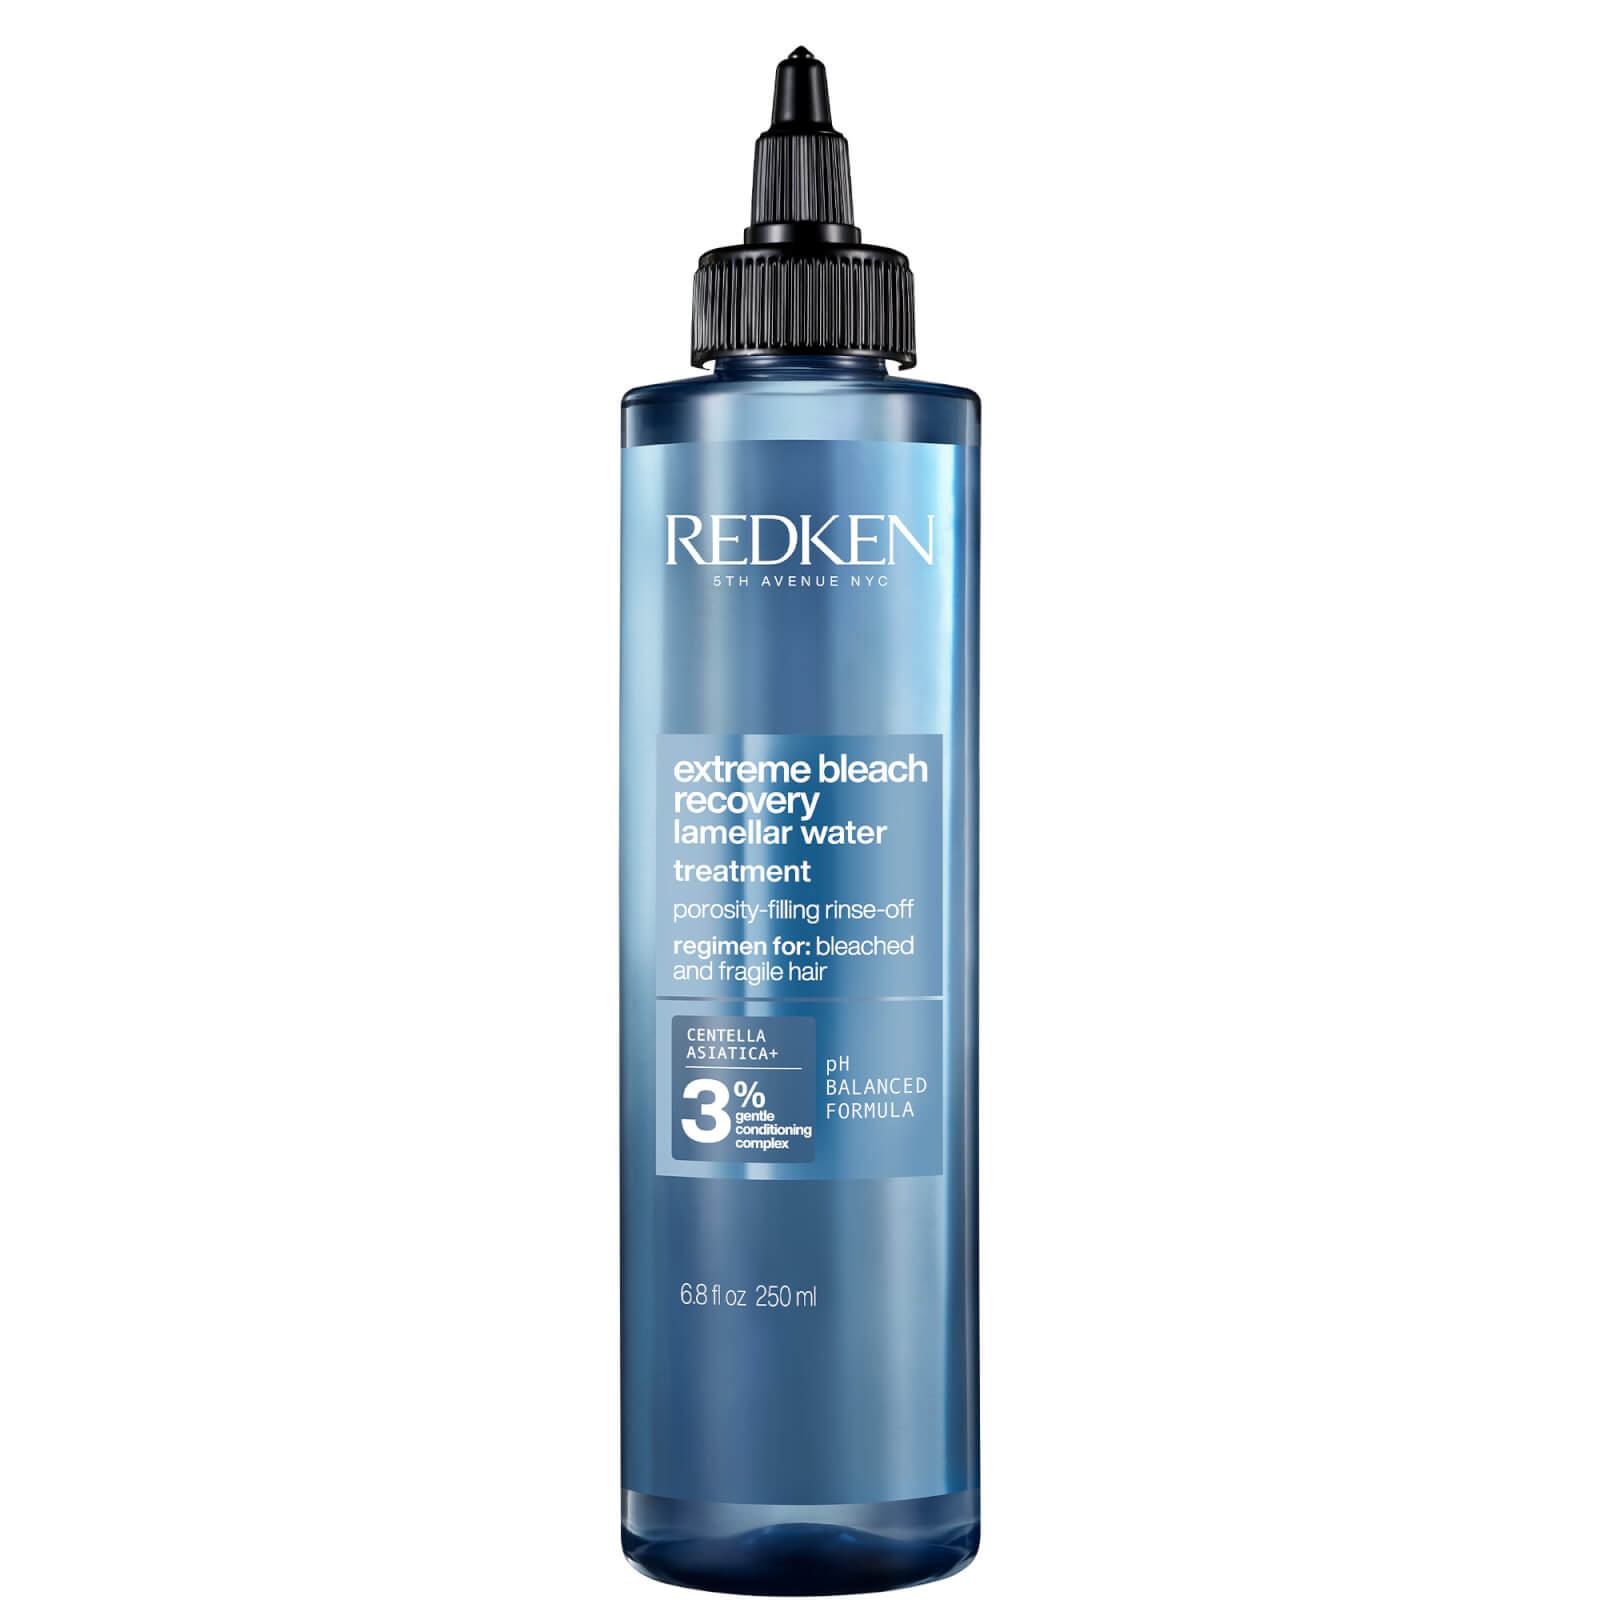 Image of Redken Extreme Bleach Recovery Lamellar Water Treatment 250ml